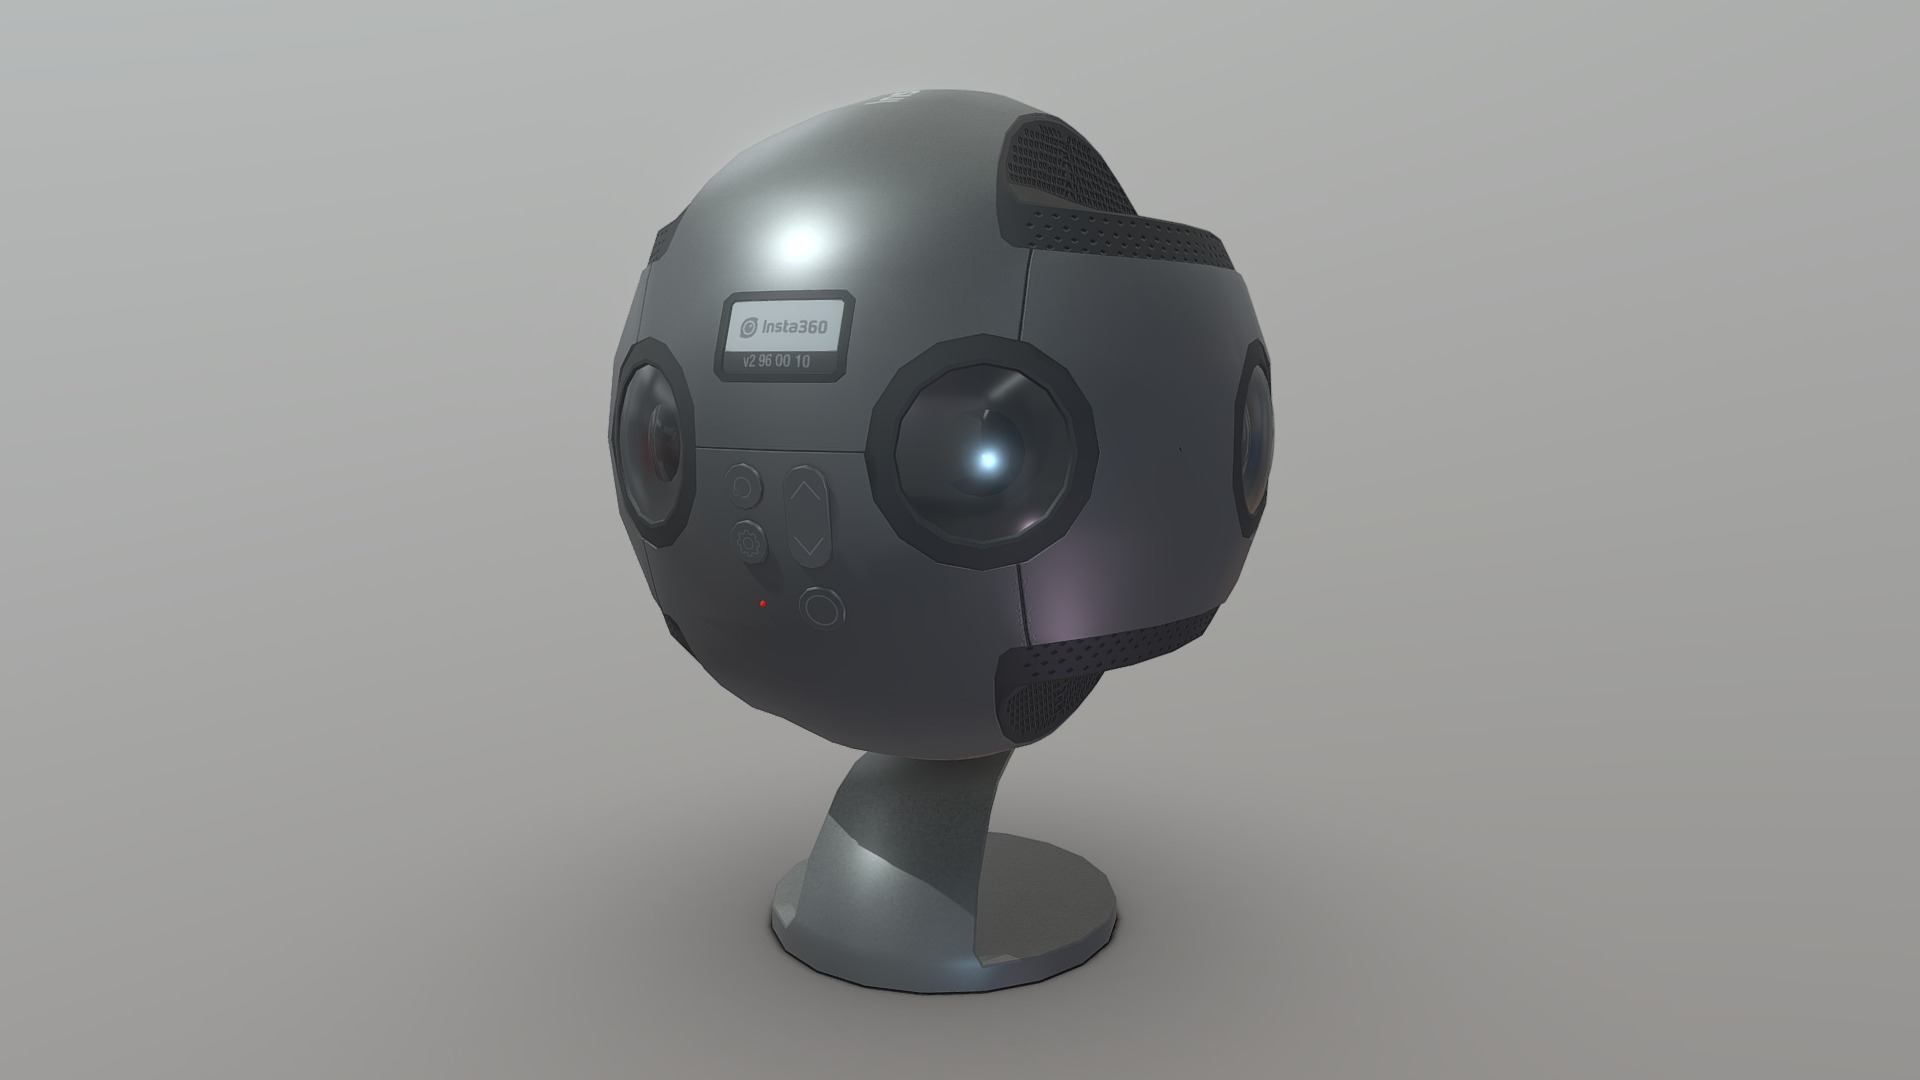 Insta 360 created with 3DsMax, texturing and rendering with 3D-Coat. Mesh with 5100 tris and 6 textures: albedo, normal map, metalness, roughness, emissive &amp; alpha map.
Camera modeled for the company Speedernet to be used in the software Sphere 3d model